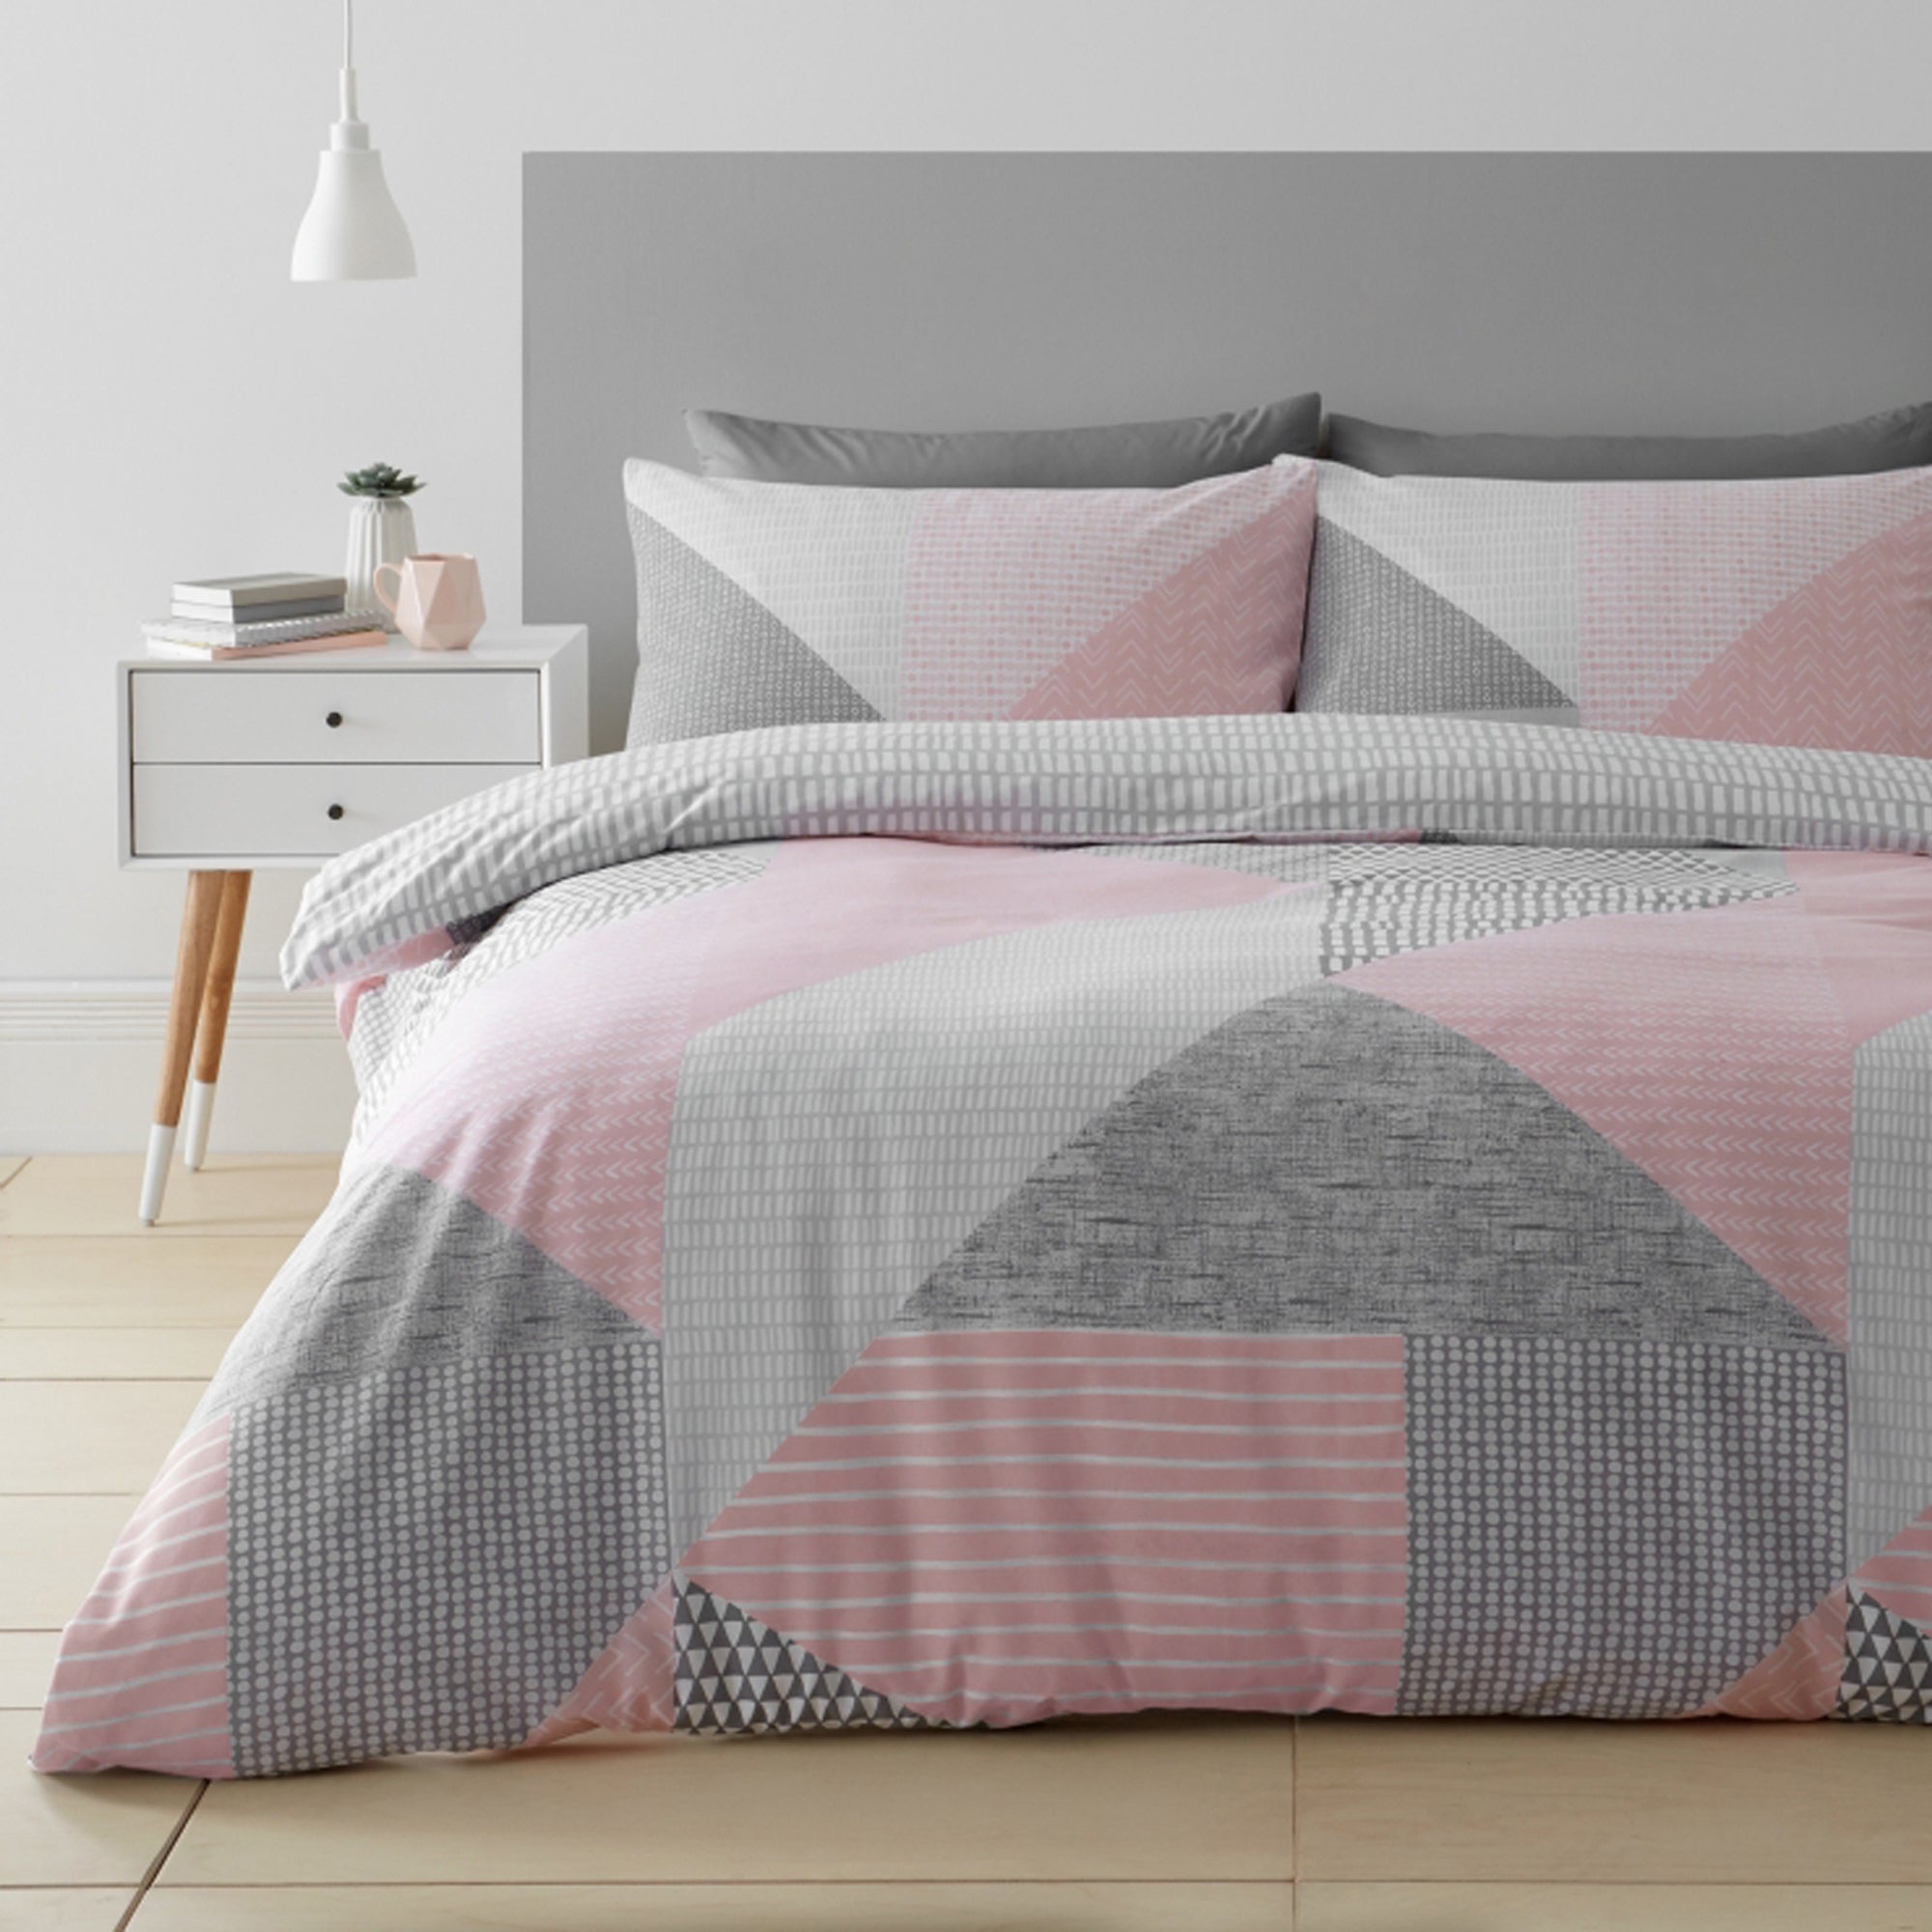 Photos - Bed Linen COVER Larsson Geo Pink Duvet  and Pillowcase Set Pink 